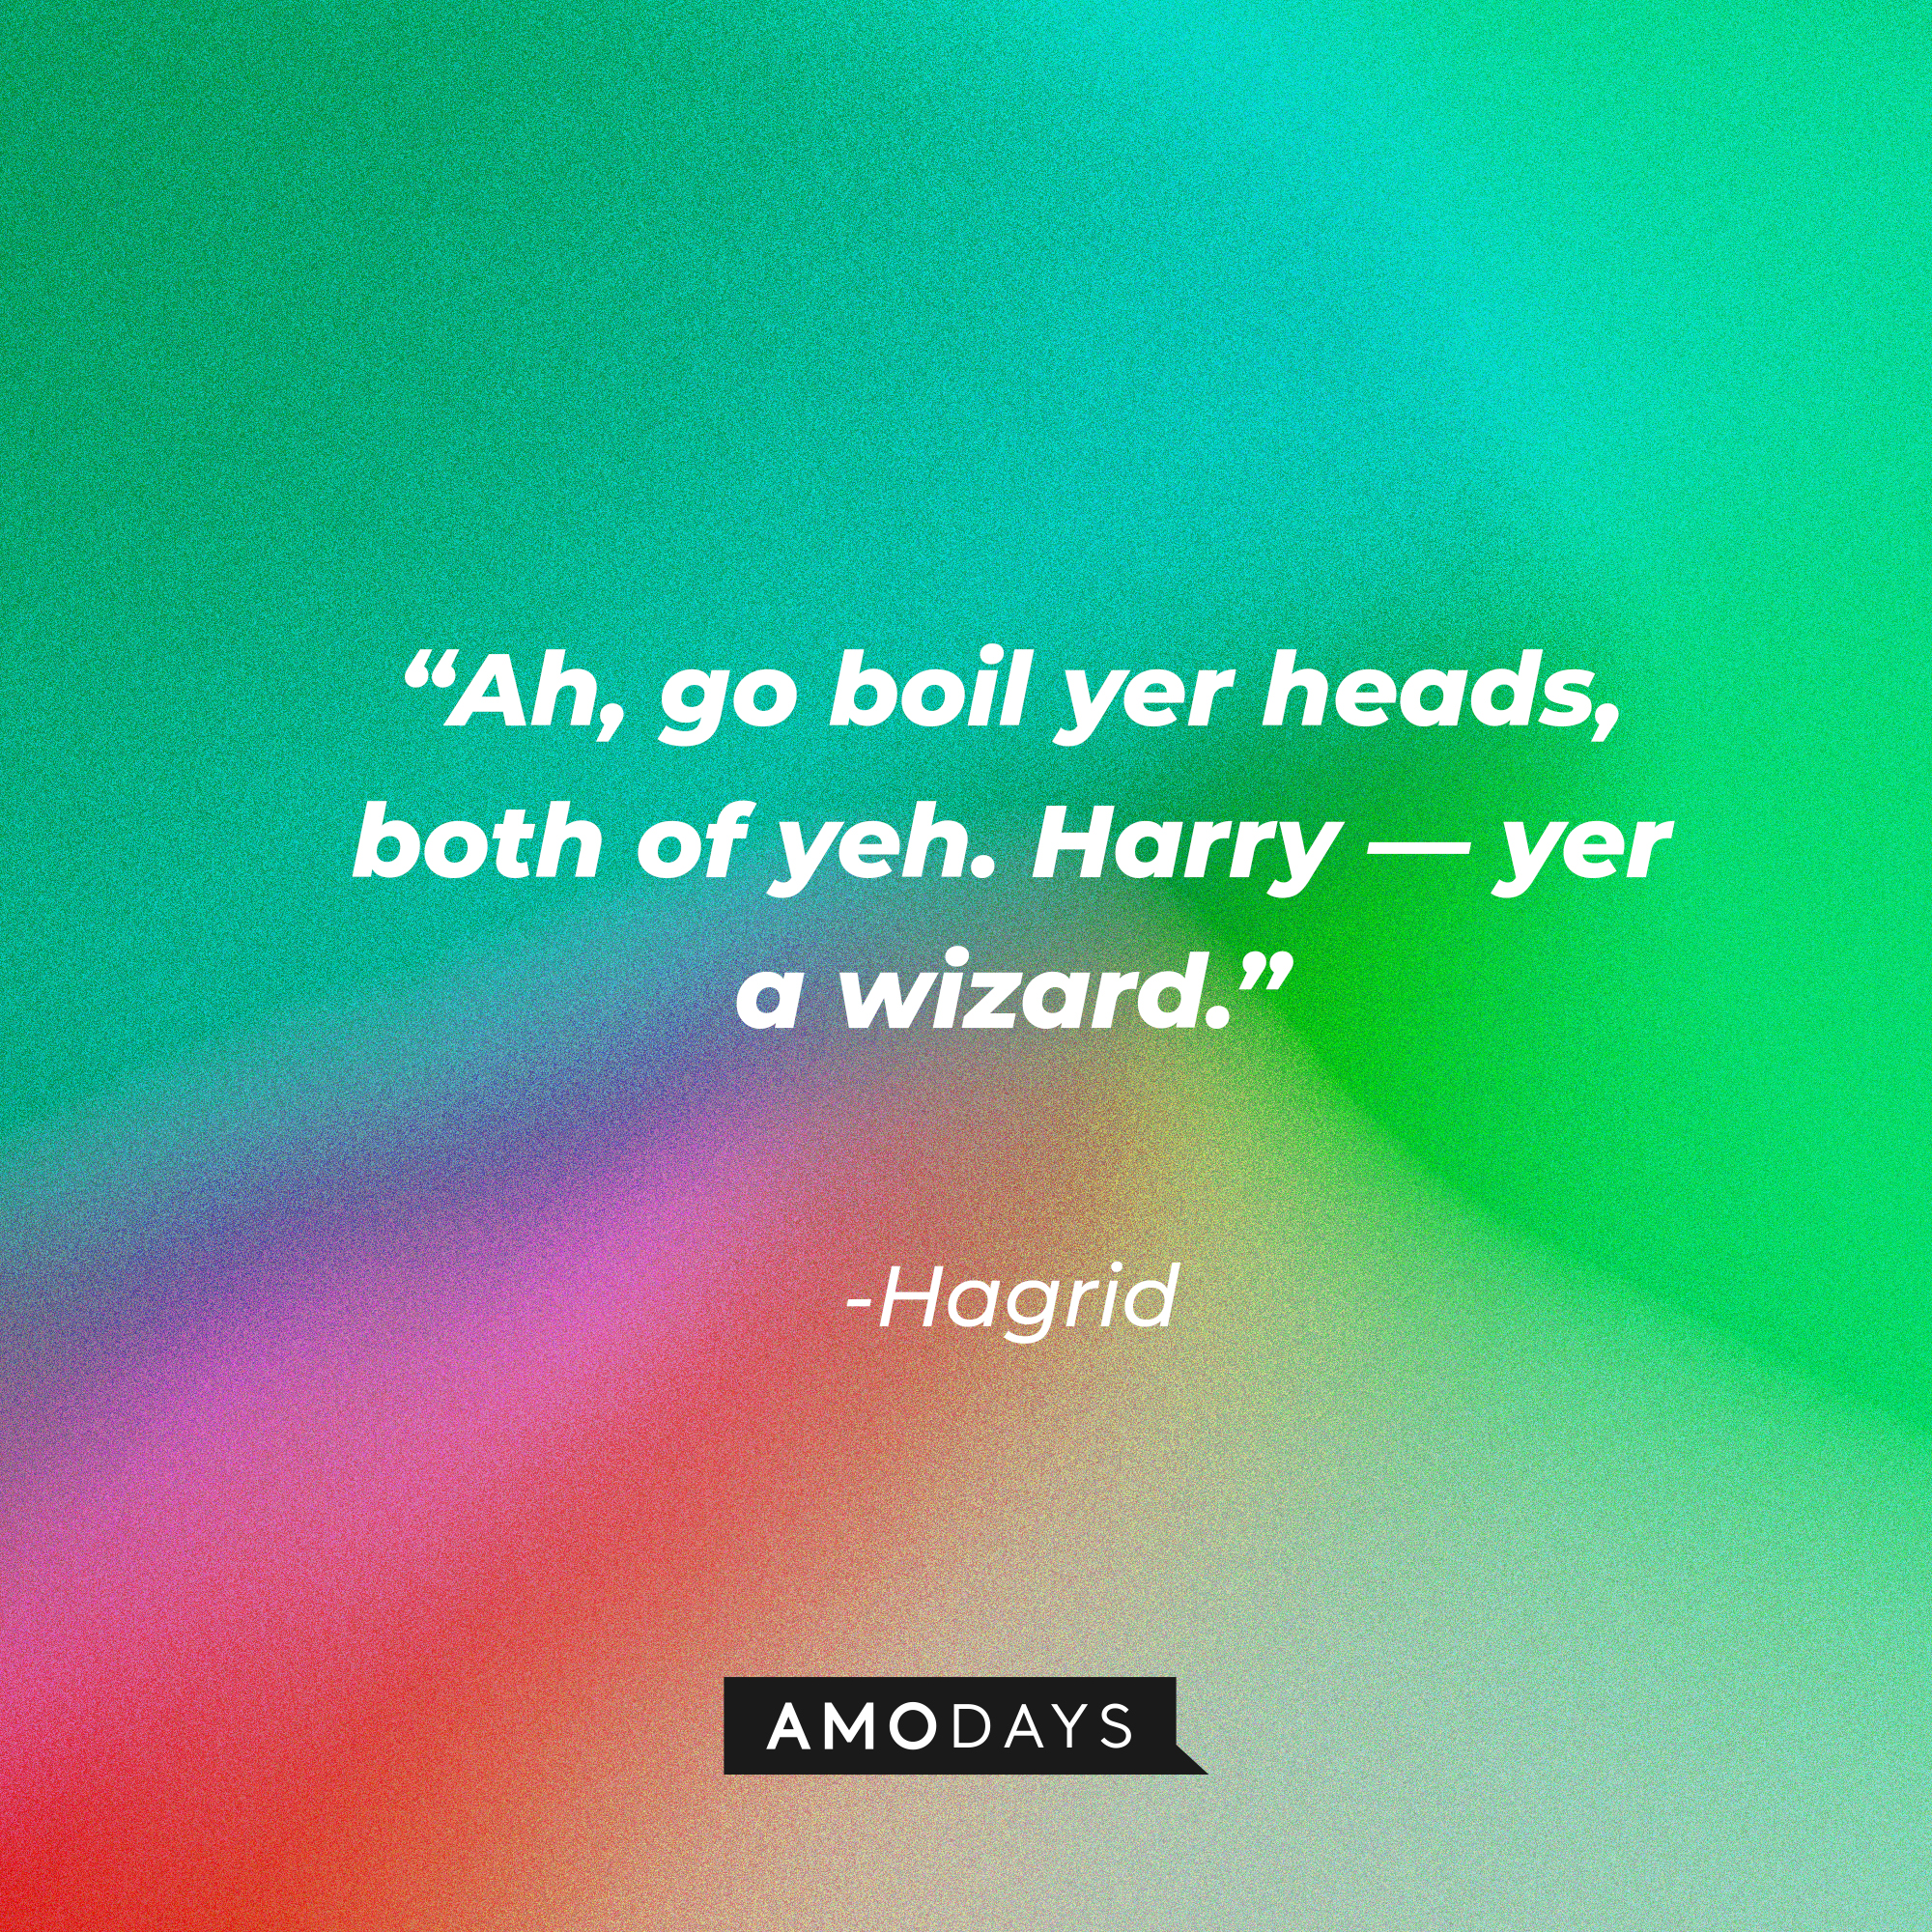 Hagrid's quote: "Ah, go boil yer heads, both of yeh. Harry—yer a wizard."| Source: AmoDays